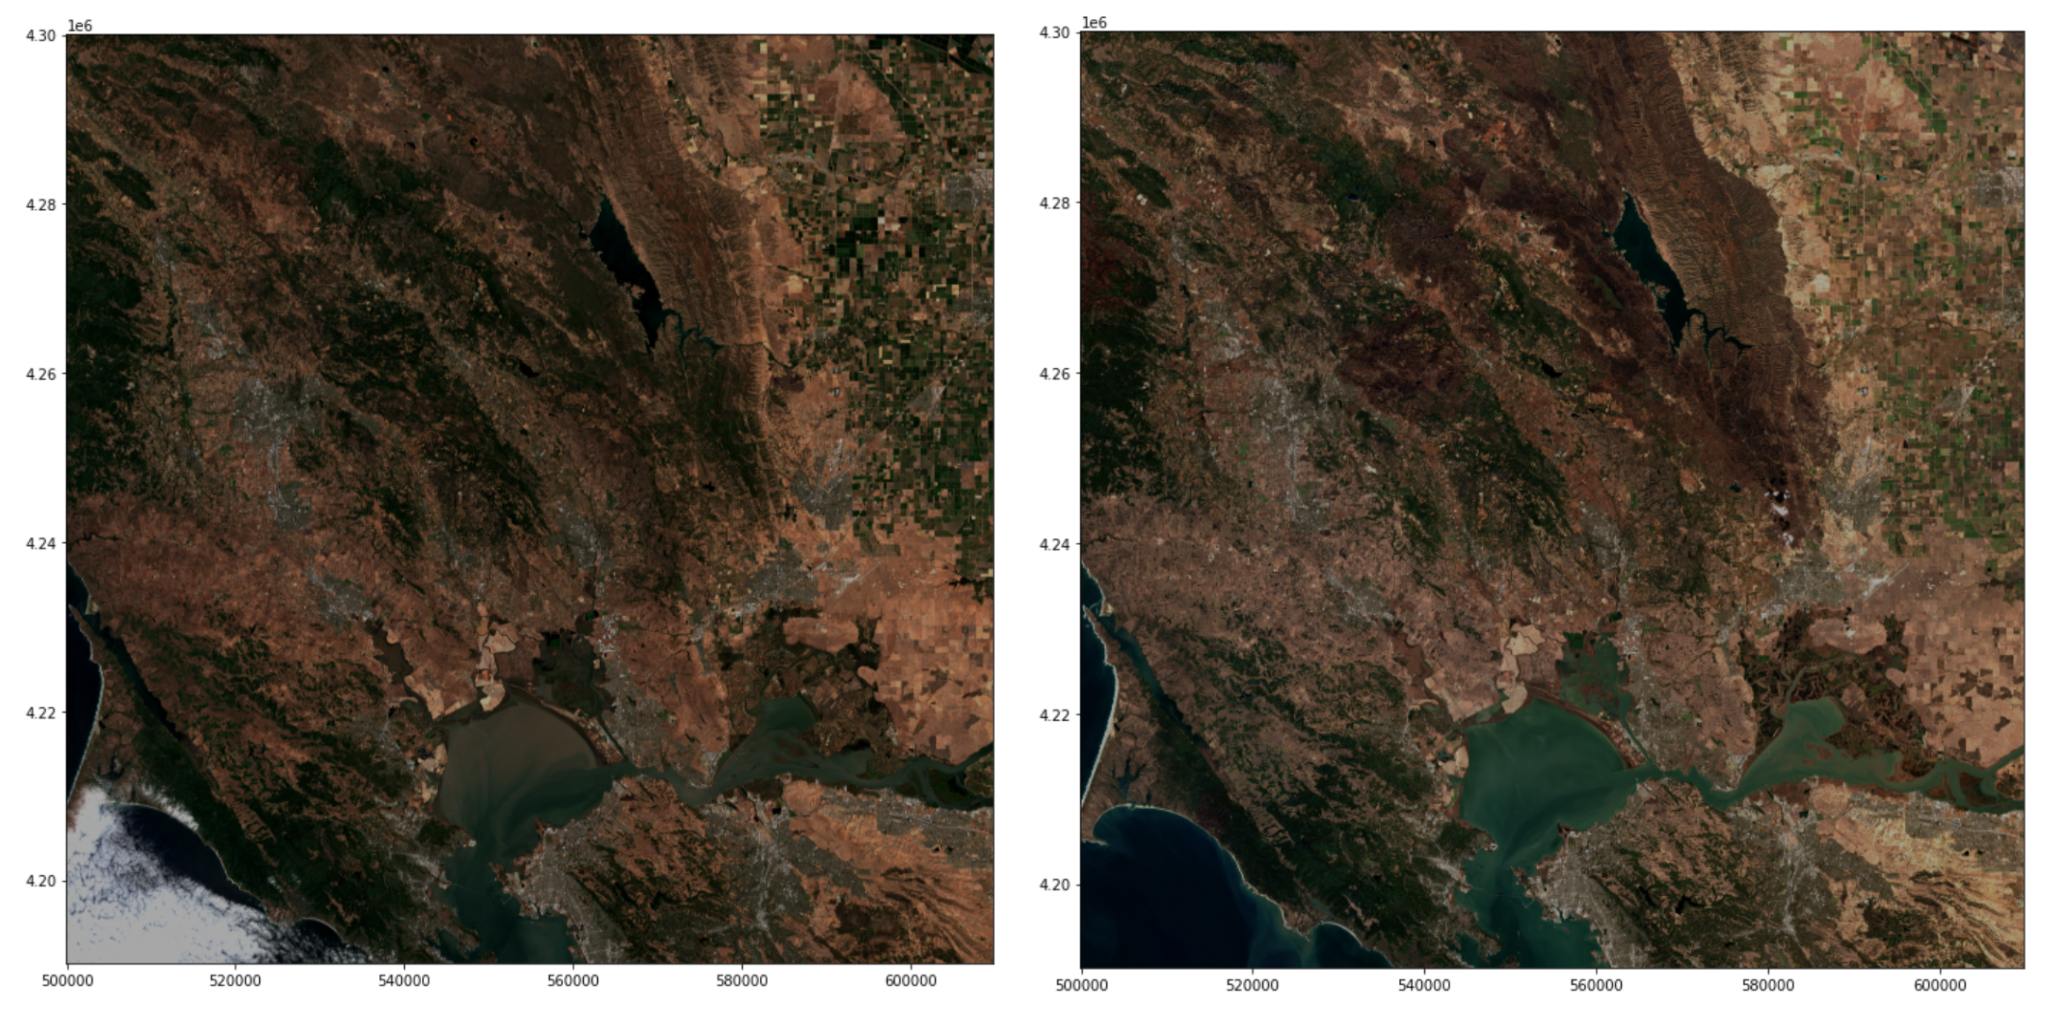 Figure 5. Natural colour composites from Sentinel-2 Level 2A data showing pre-fire conditions on 7 August 2020 (left) and post-fire conditions on 25 November 2020 (right) in California, USA.